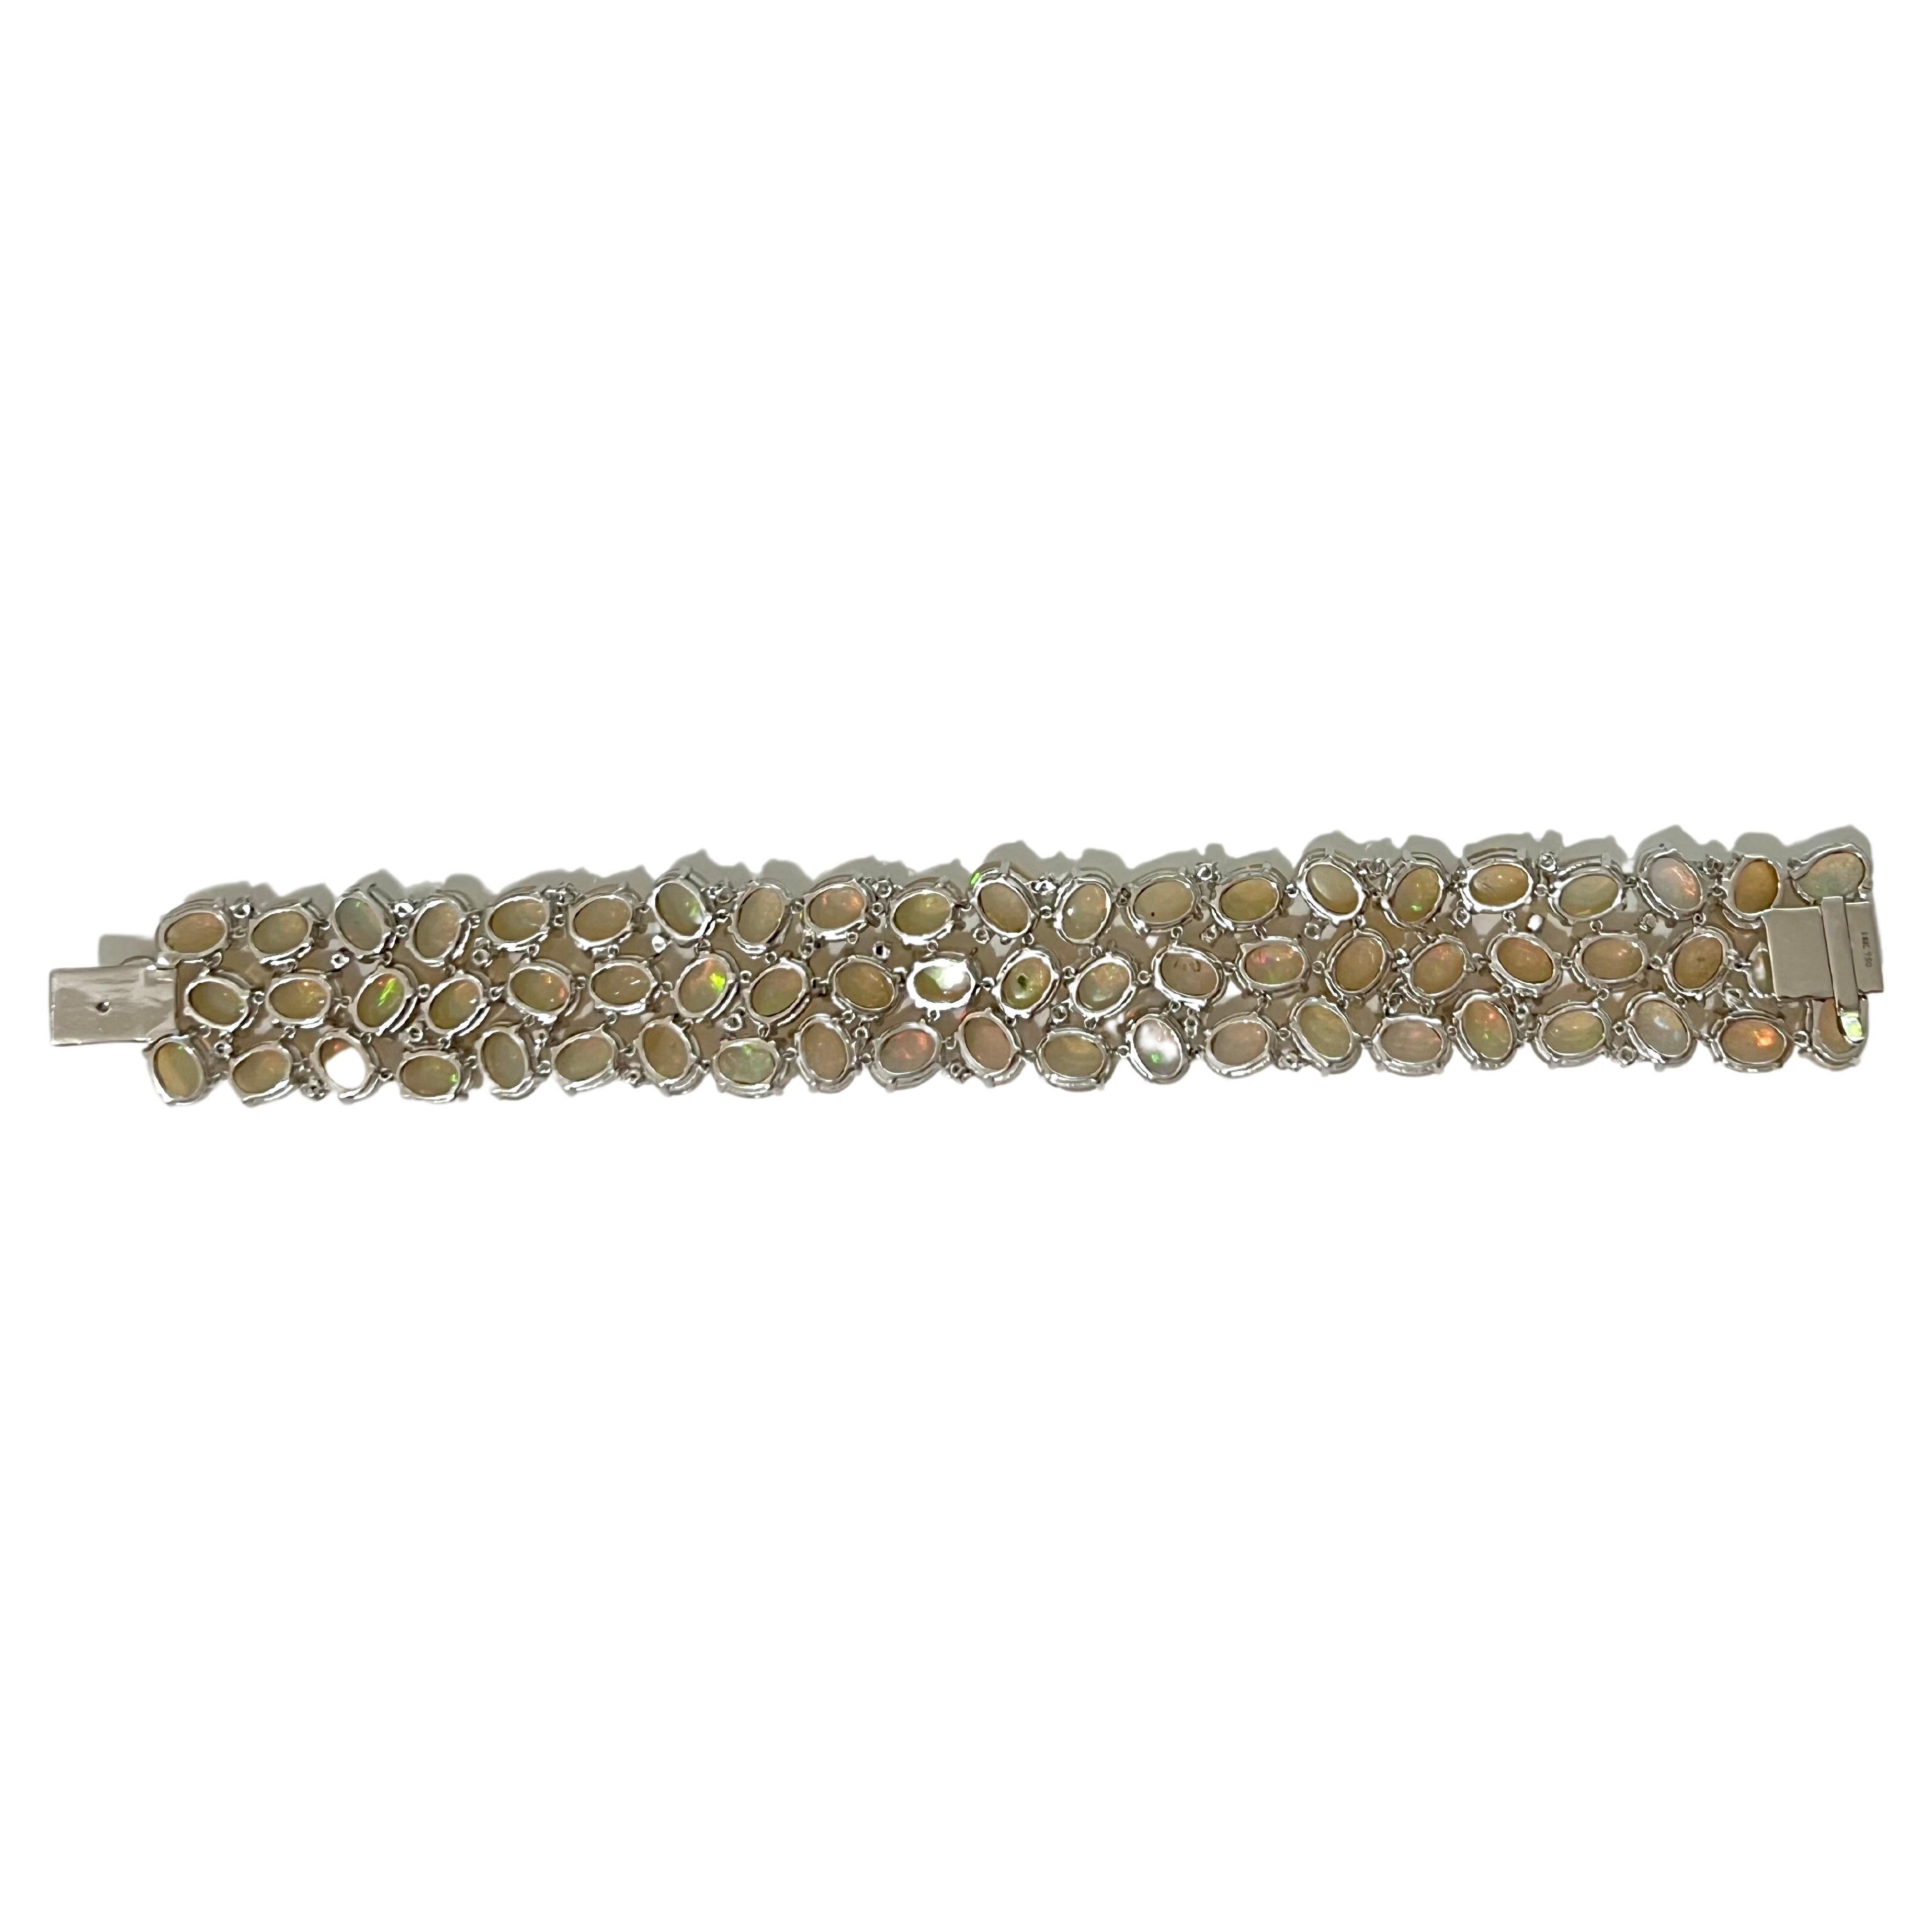 This gorgeous Ethiopian bracelet has diamonds sprinkled throughout to make this mini cuff style pop.  The bracelet is 1 inch width, and will complement any outfits as the colors in the opals range from red, blue-green, and orange.  The setting is